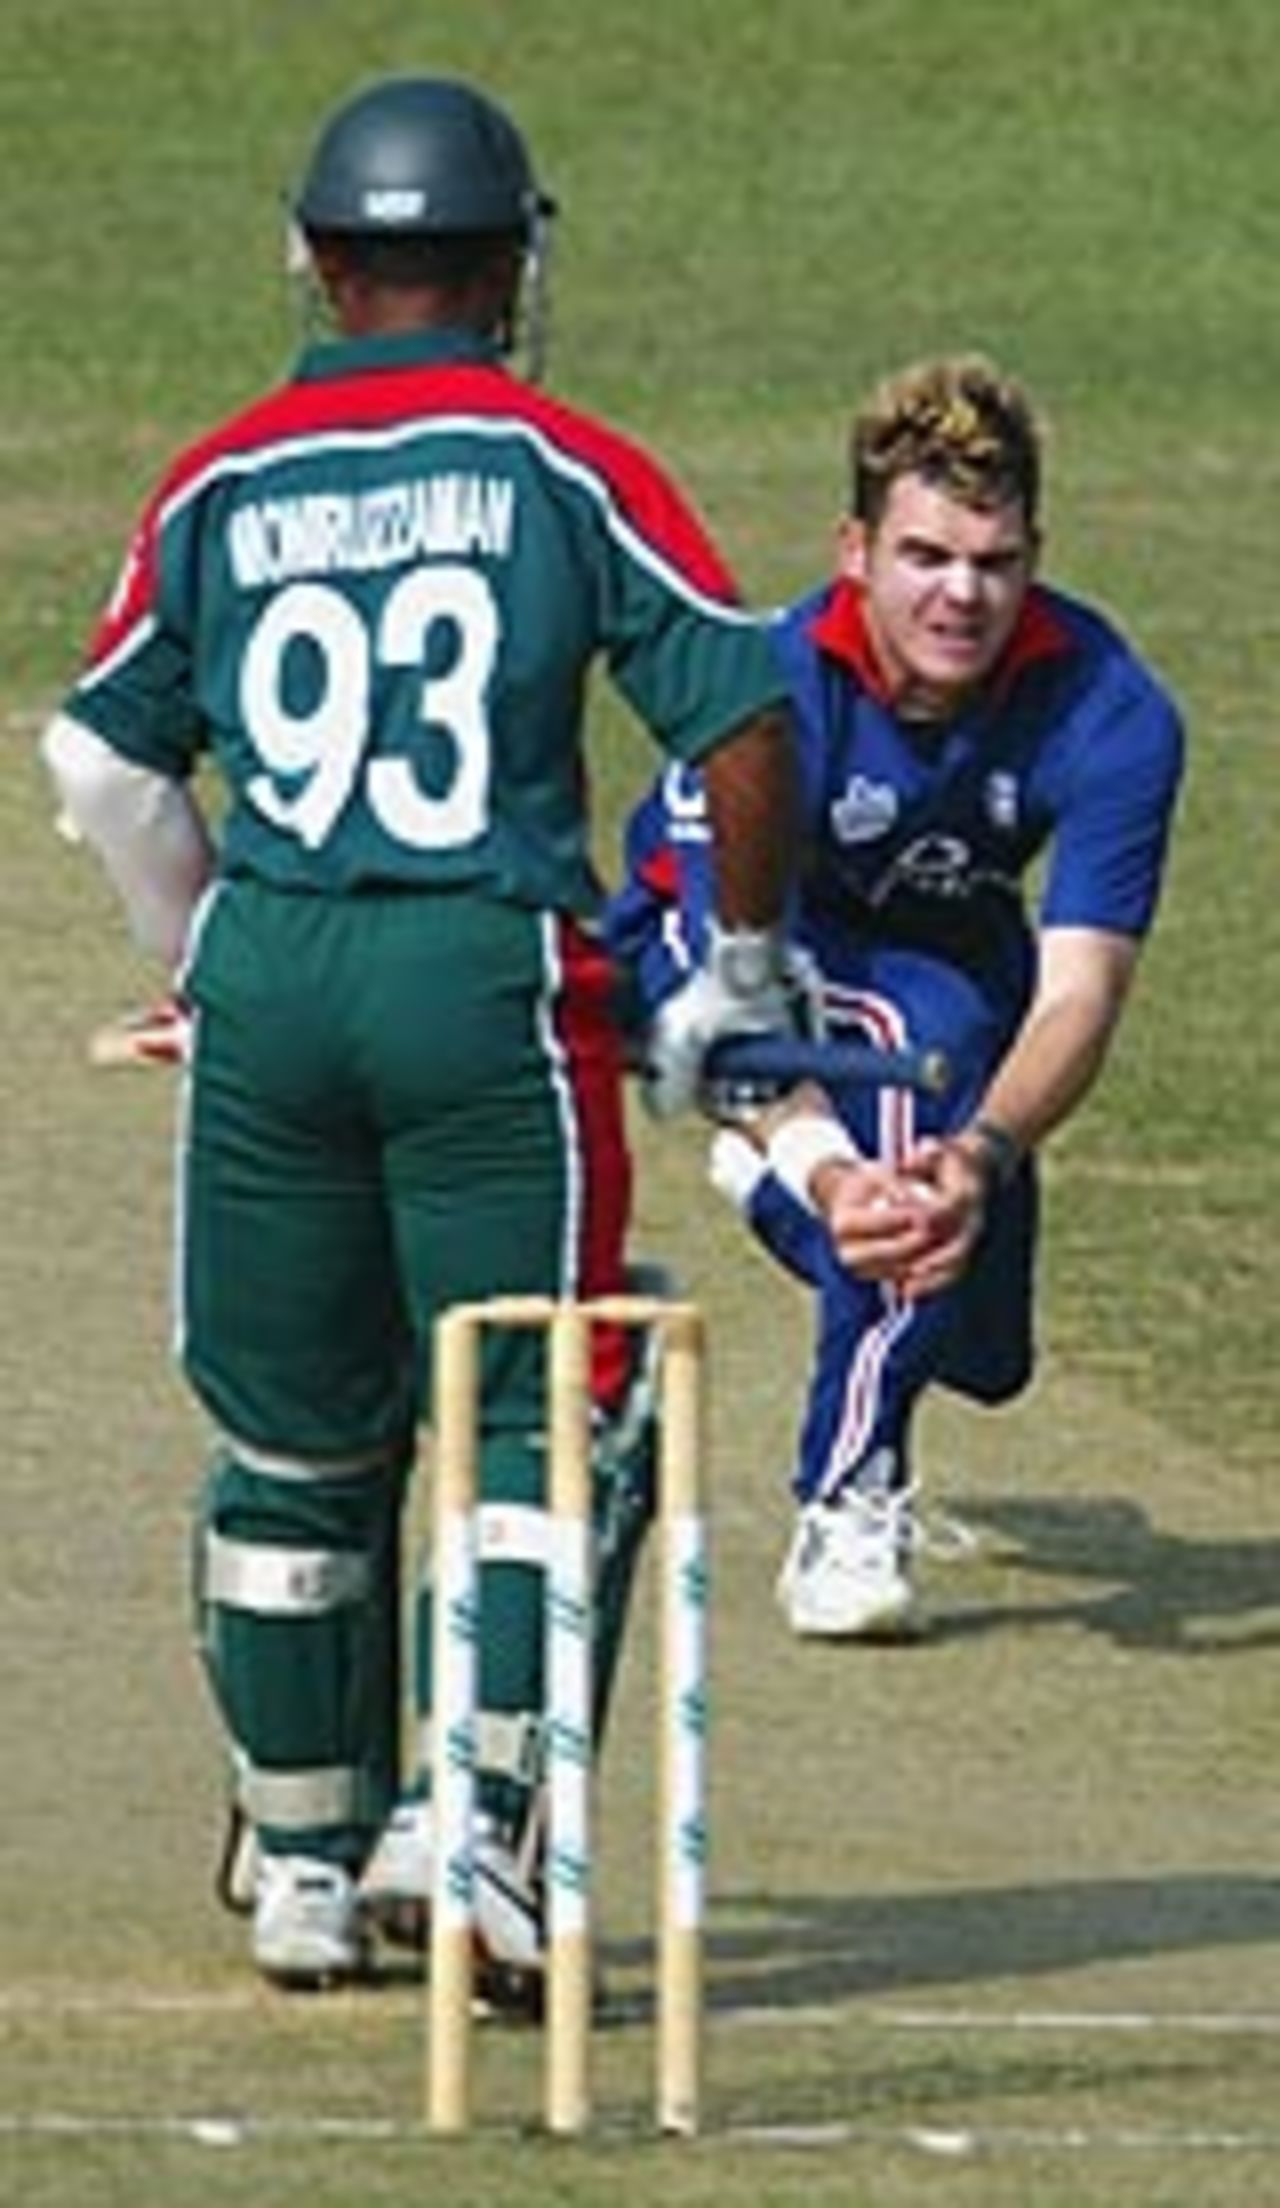 James Anderson grabs the first wicket in the Dhaka ODI